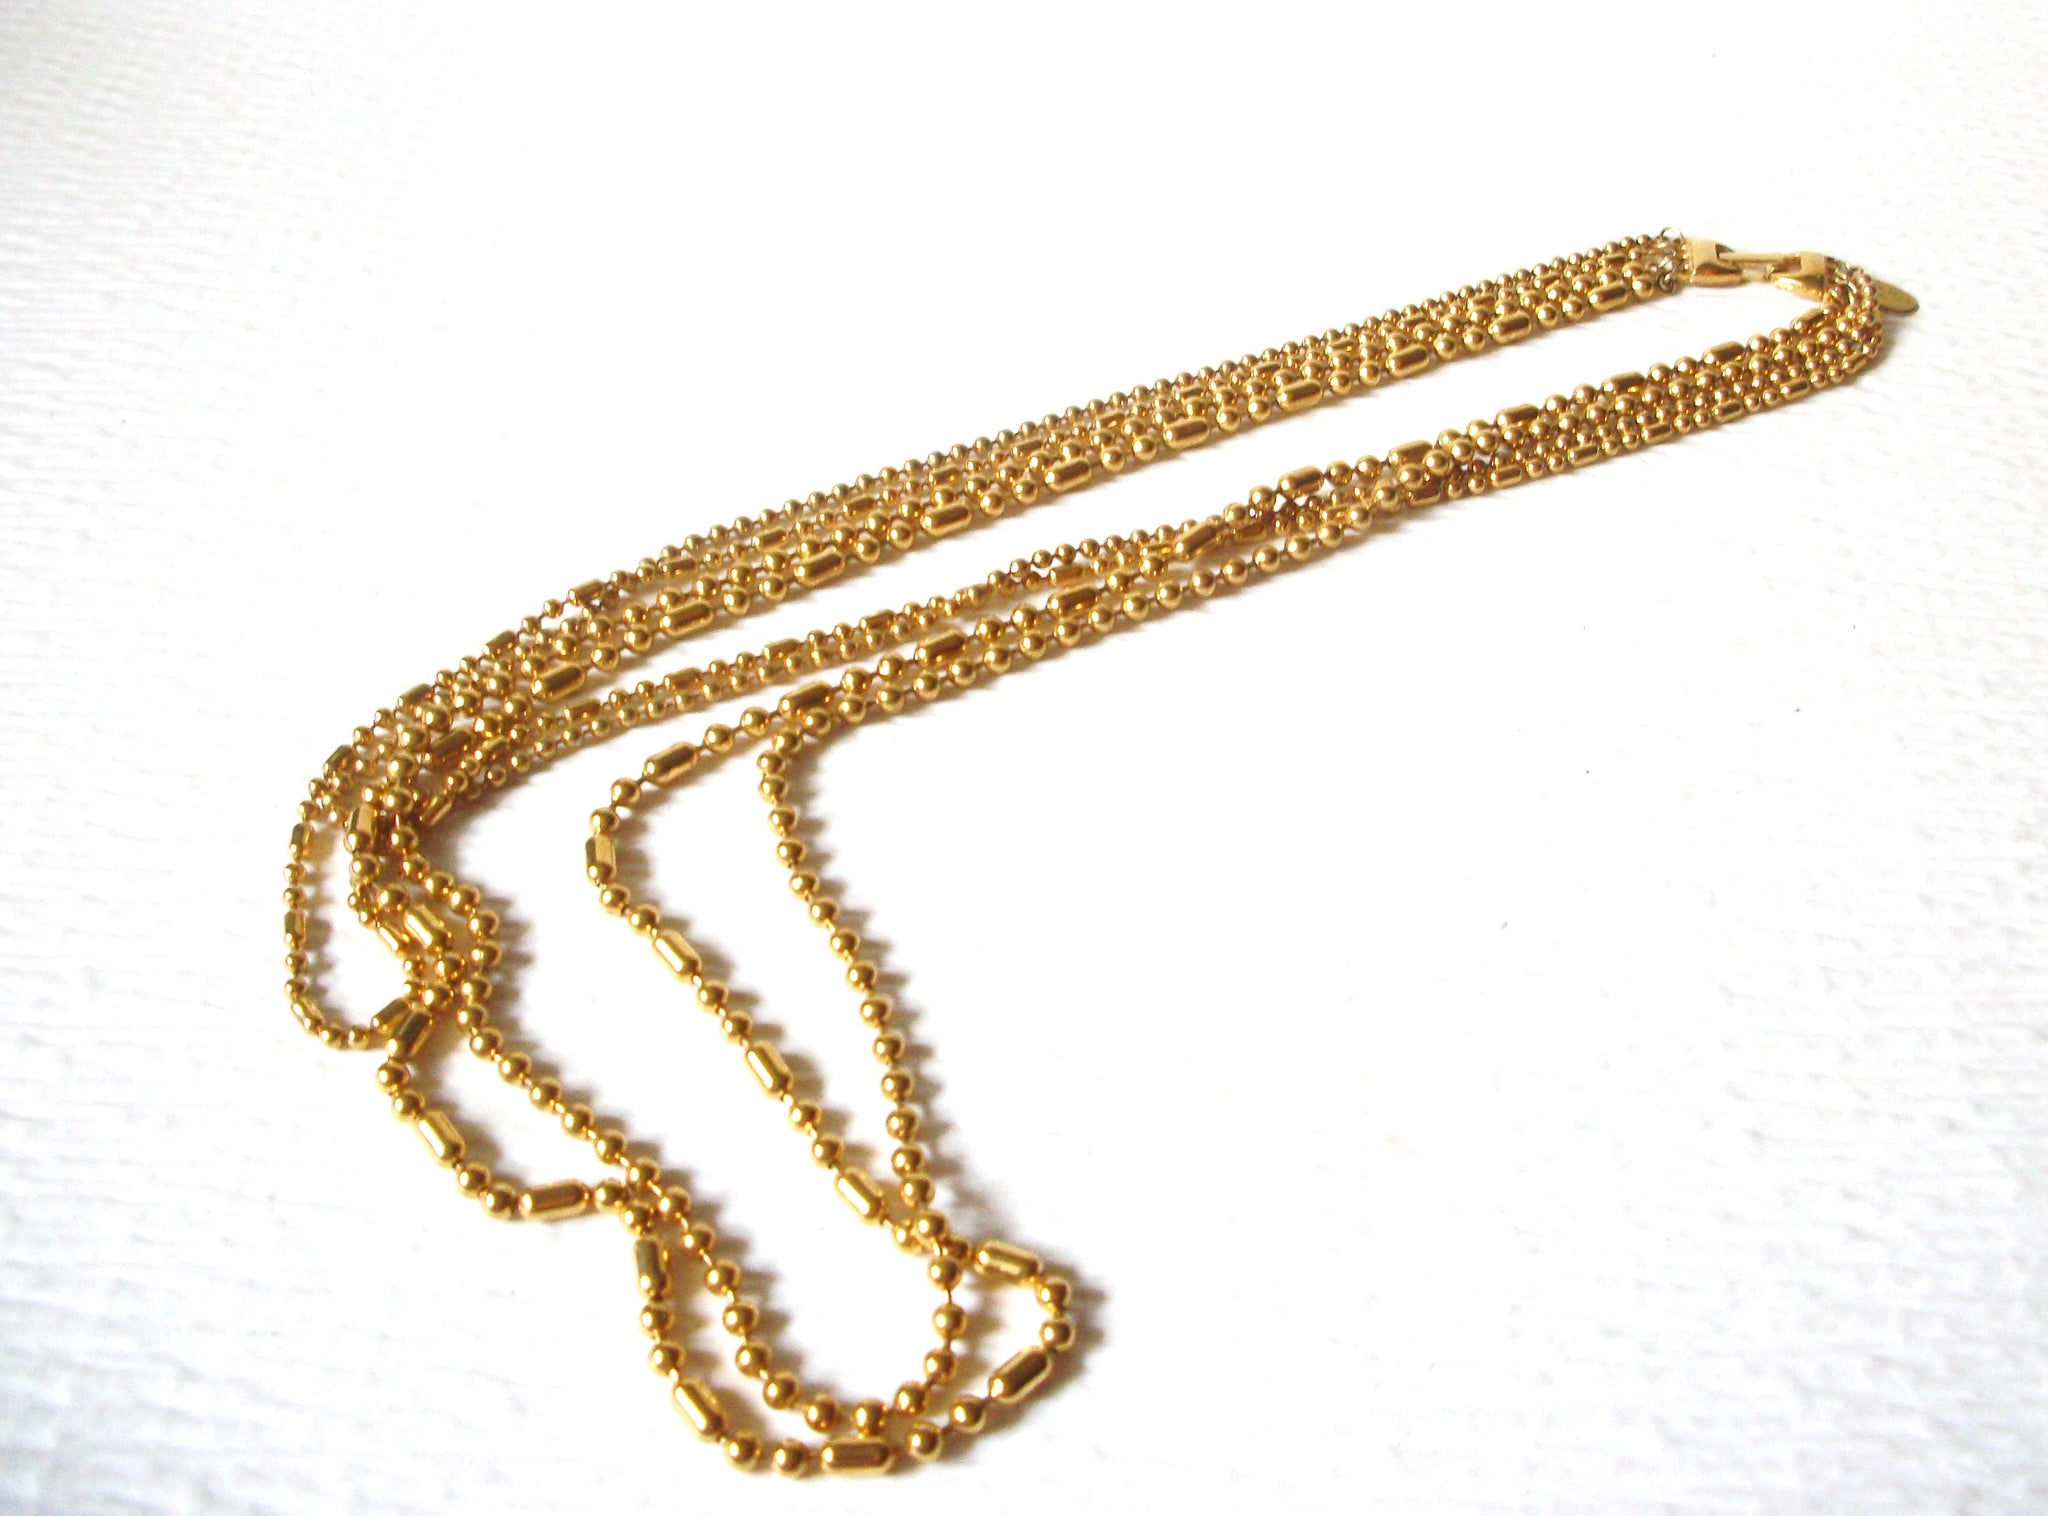 Vintage ANNE KLEIN Gold Toned Bamboo Link Necklace 5917